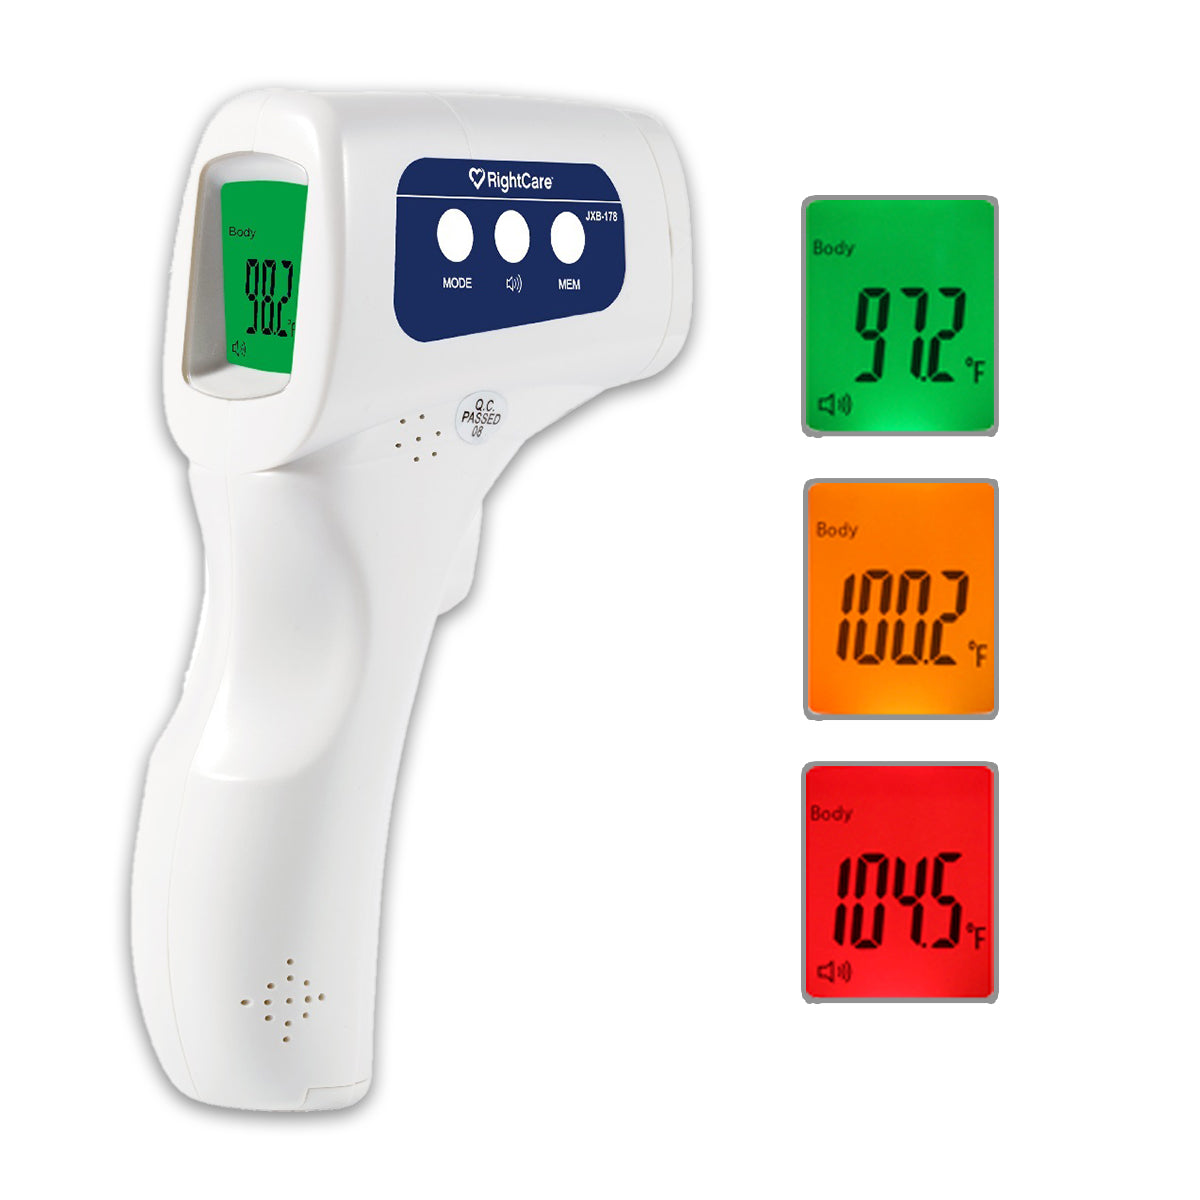 Berrcom Non-Contact Infrared Thermometer JXB-178 (Requires 2 AA batteries)  - White 